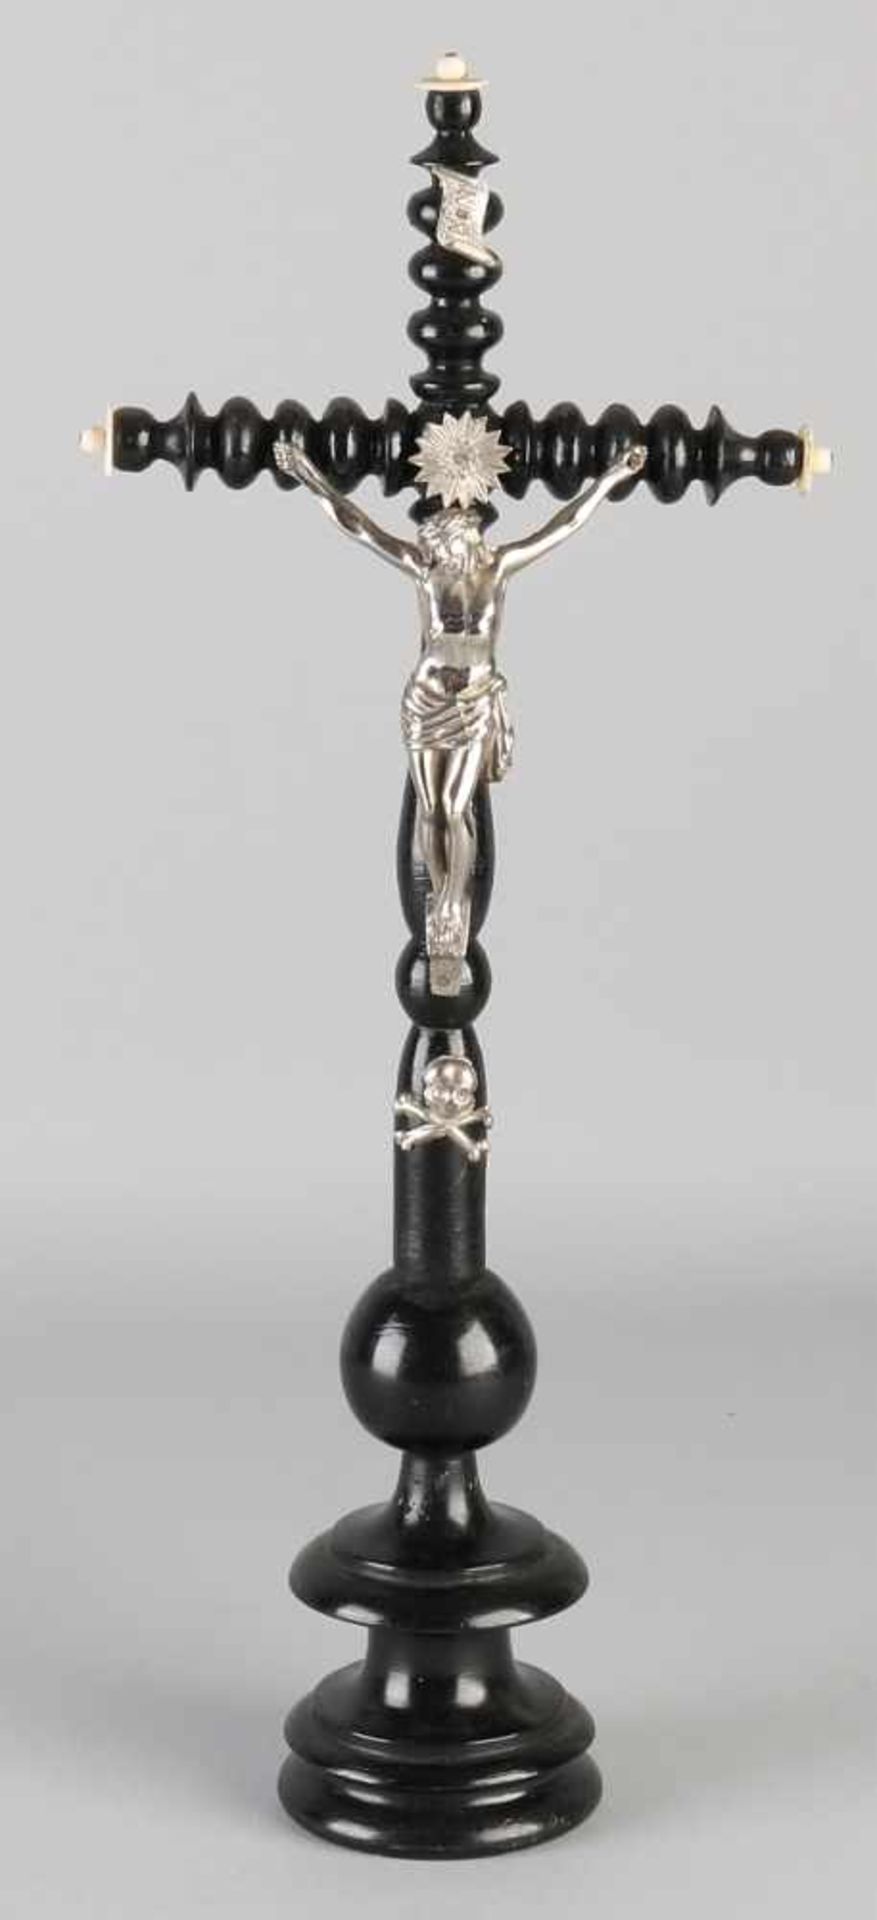 19th Century geeboniseerd wooden crucifix plated Corpus Christi and Inri. Size: H 39 cm. In good